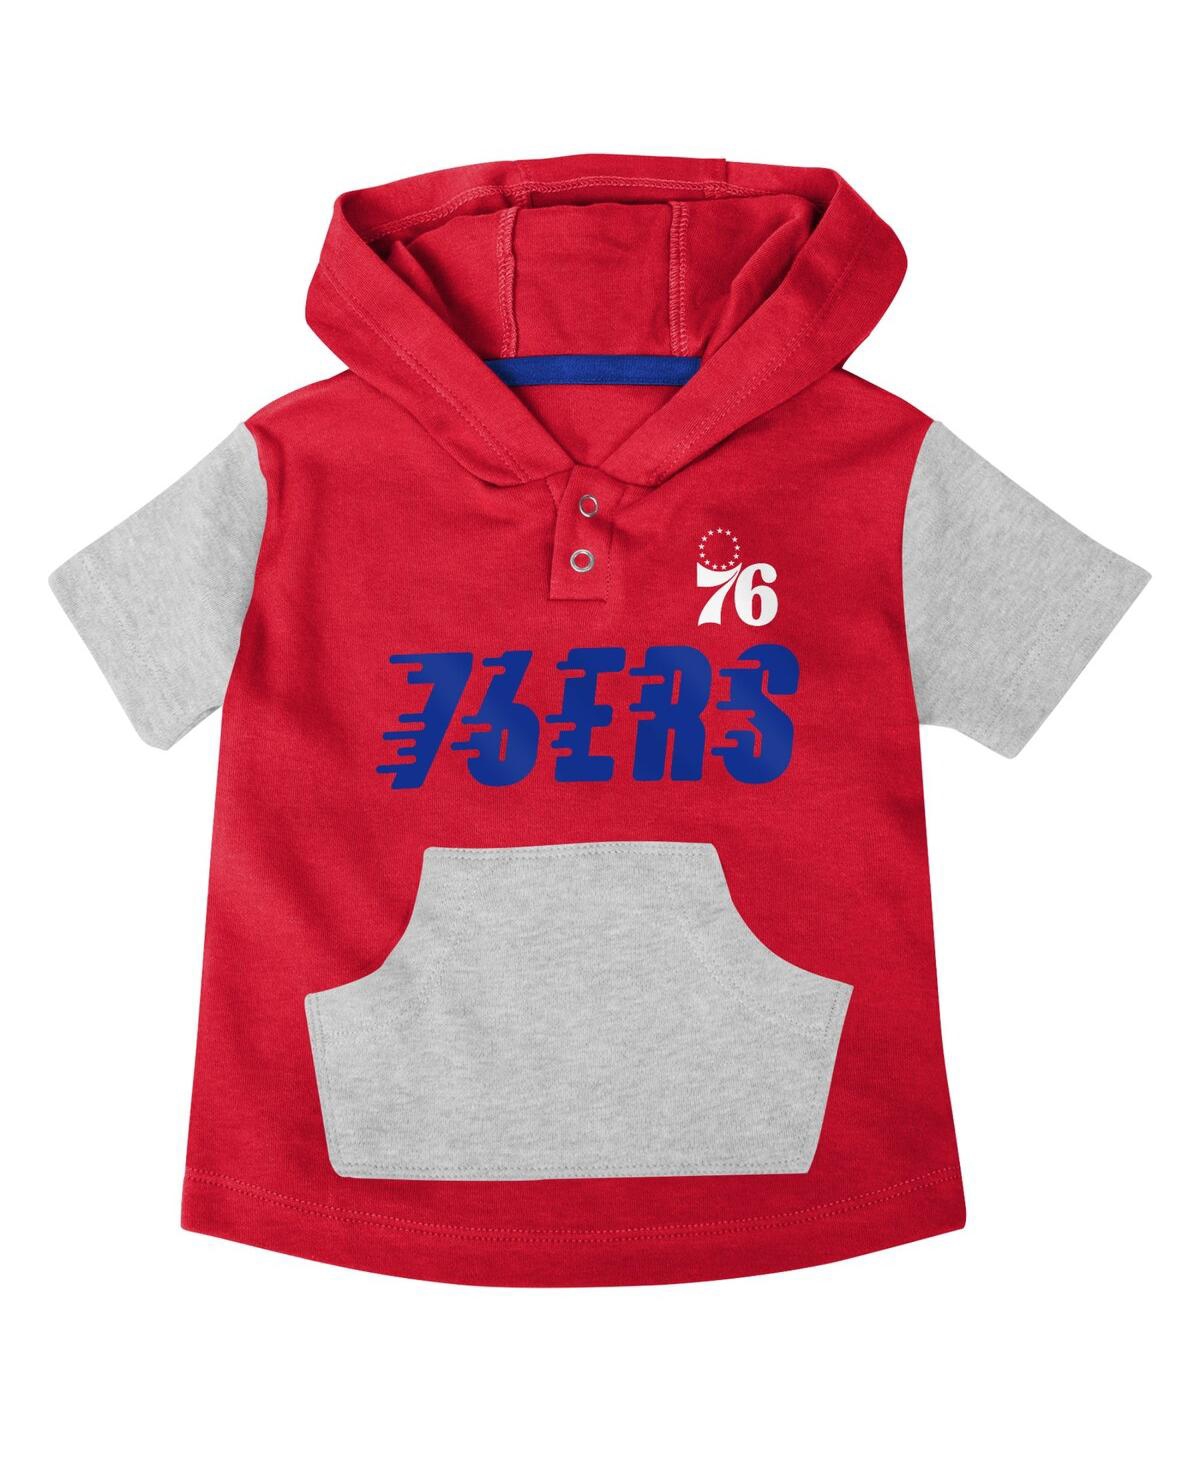 Shop Outerstuff Baby Boys And Girls Royal, Red, Gray Philadelphia 76ers Bank Shot Bodysuit, Hoodie T-shirt And Short In Royal,red,gray